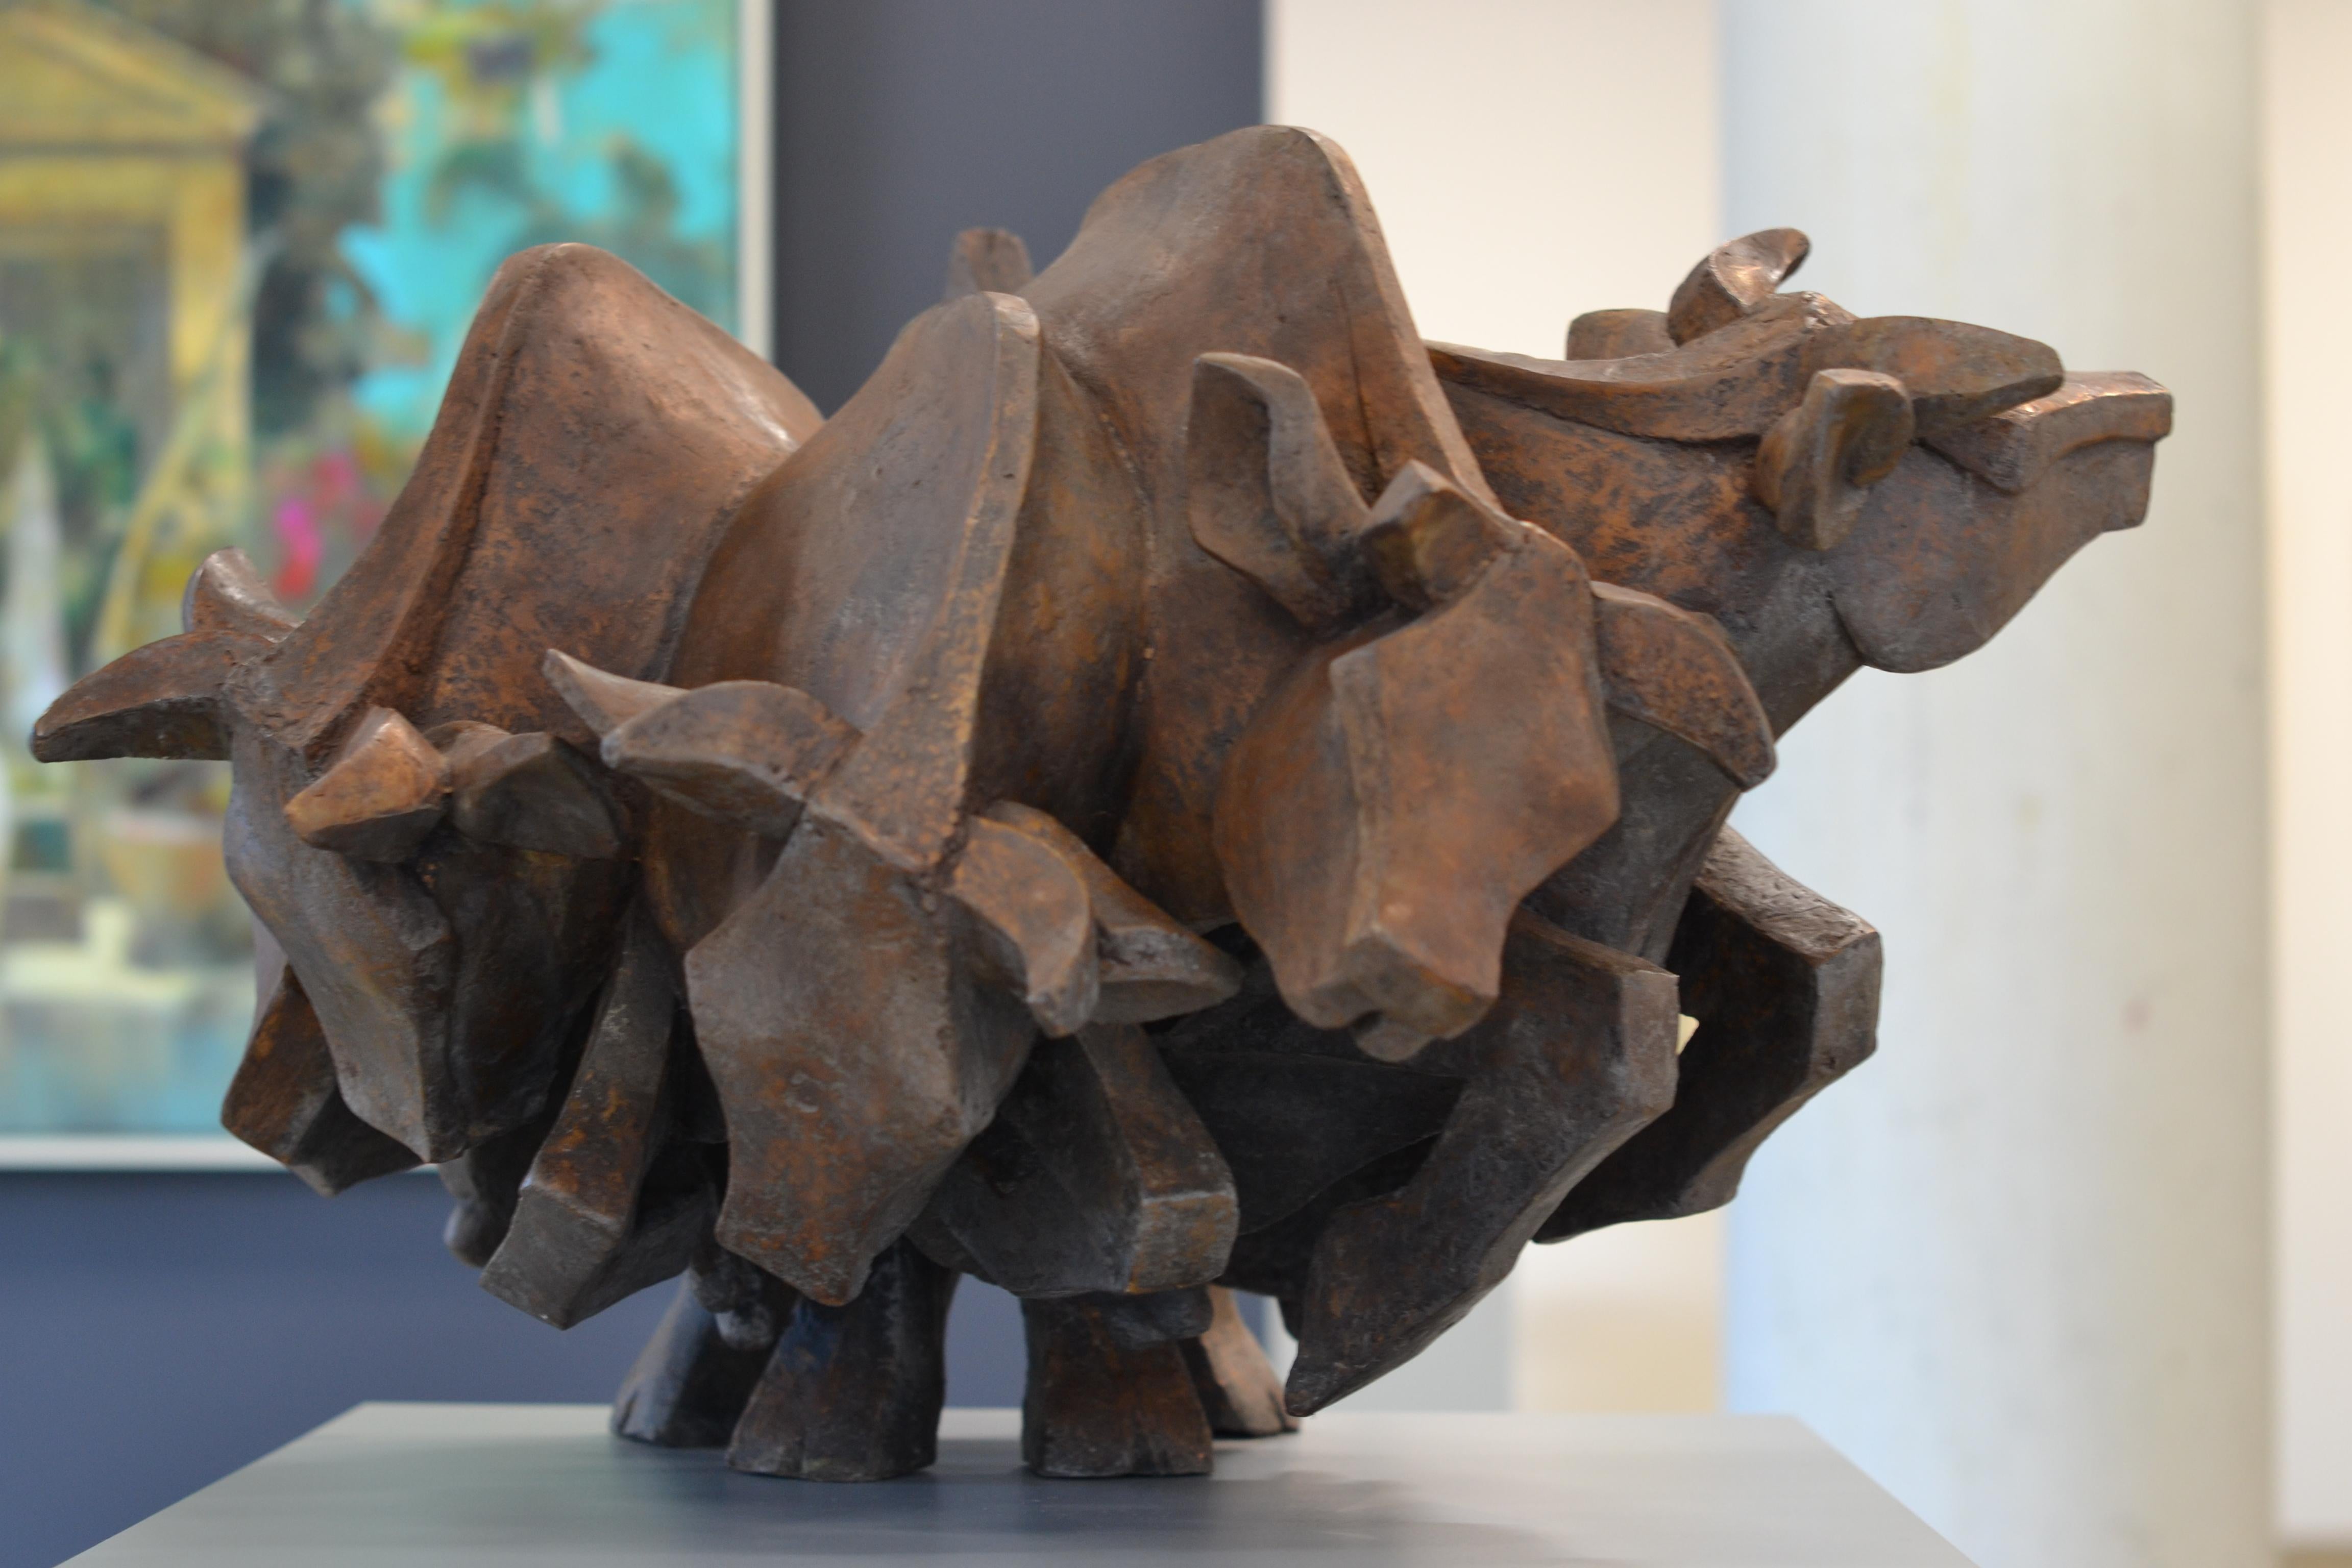 Antoinette Briet Abstract Sculpture - Free- 21st Century Contemporary Bronze Sculpture of a Herd of Cows Running Free